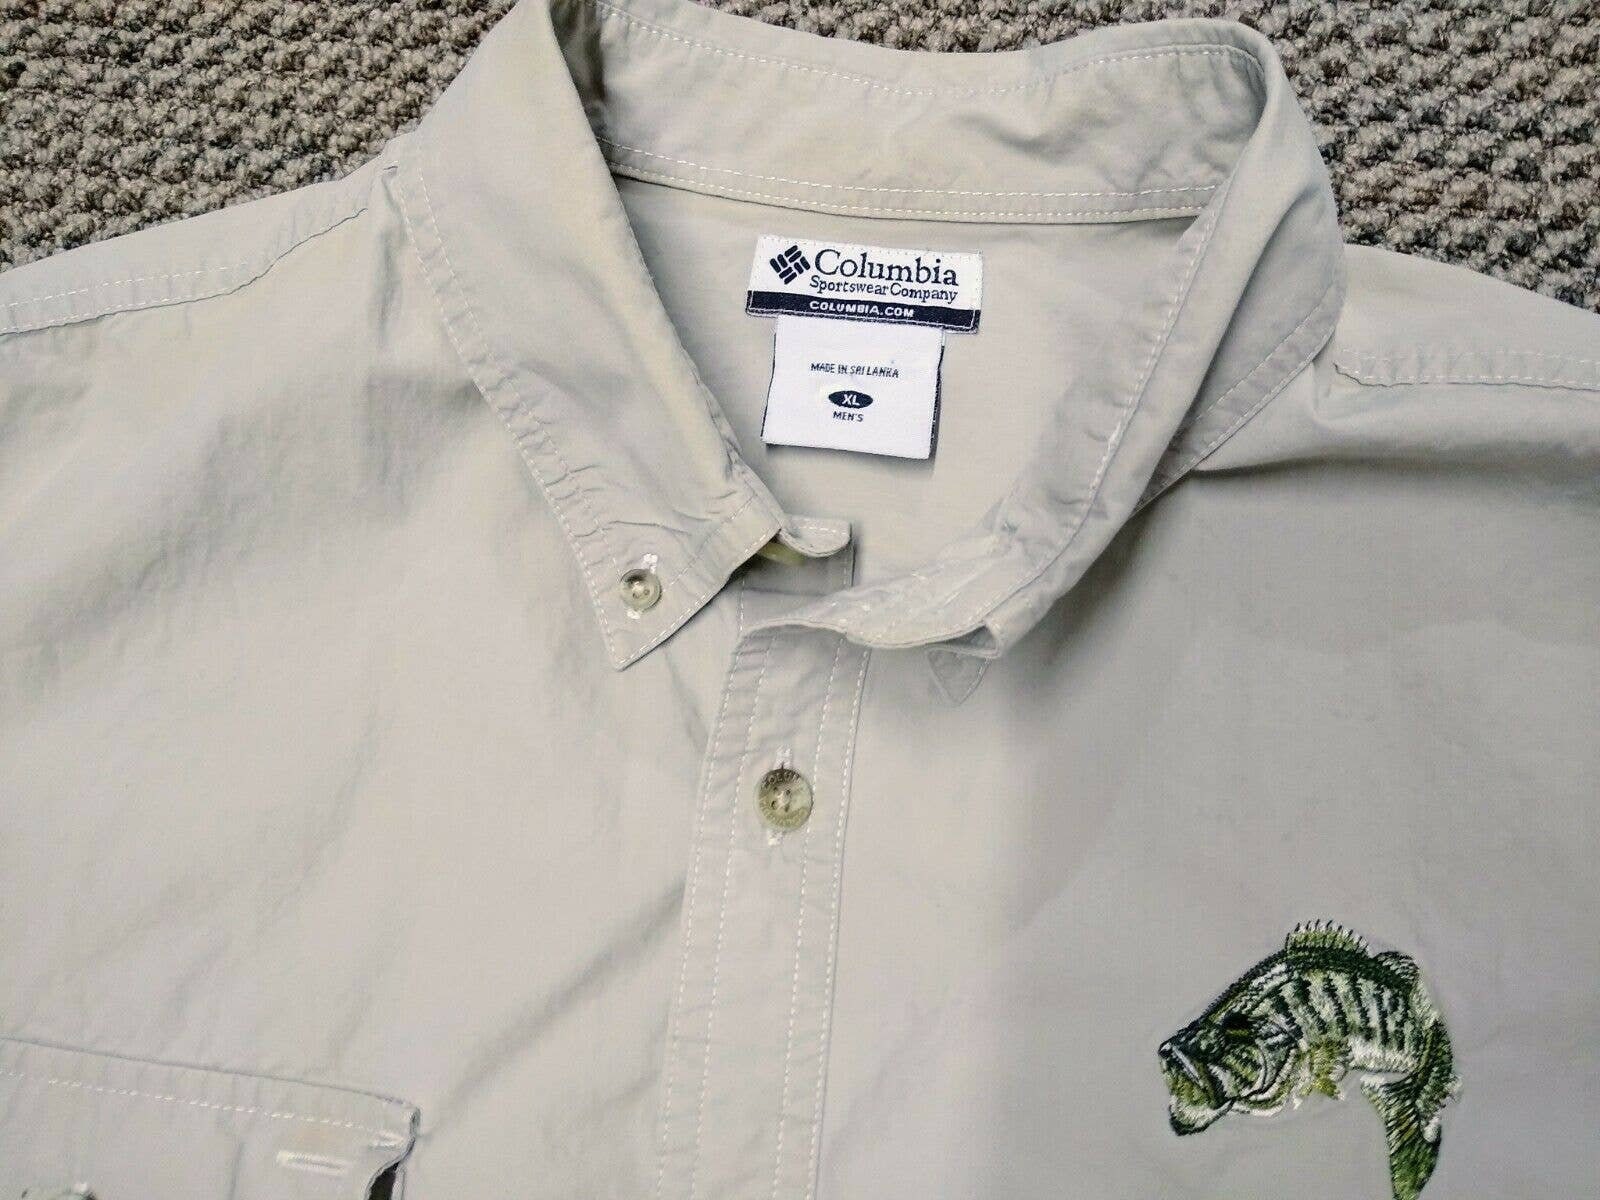 Columbia sportswear performance fishing gear short sleeved polo size large